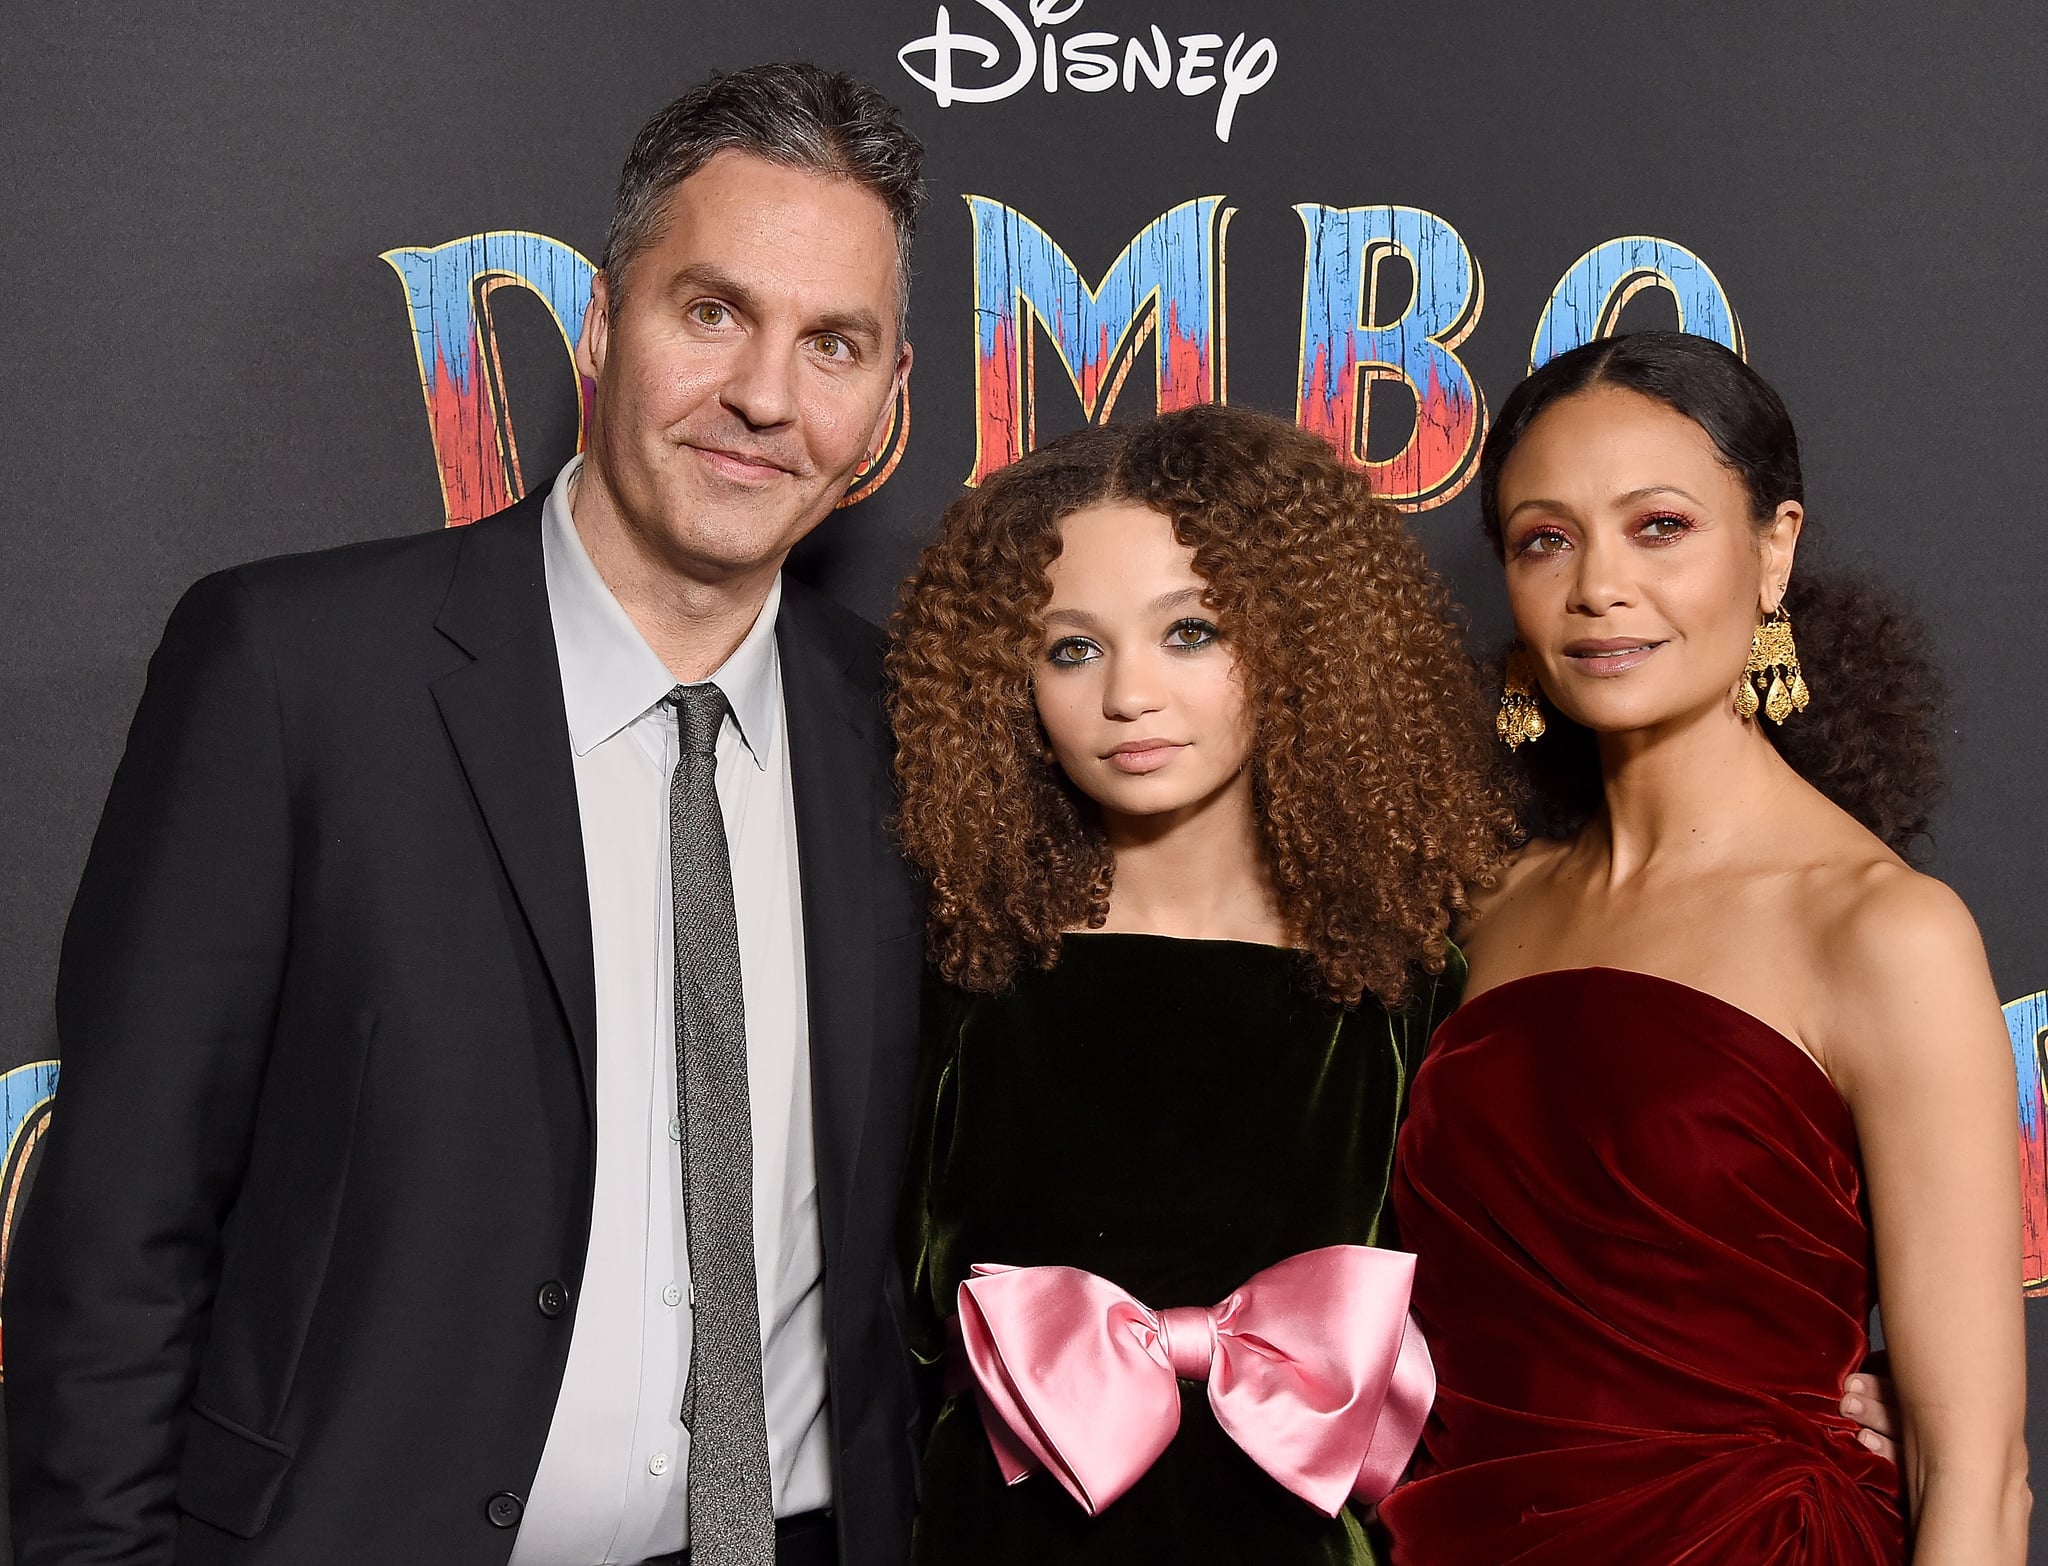 LOS ANGELES, CALIFORNIA - MARCH 11: Olle Parker, Nico Parker and Thandie Newton attend Disney's premiere